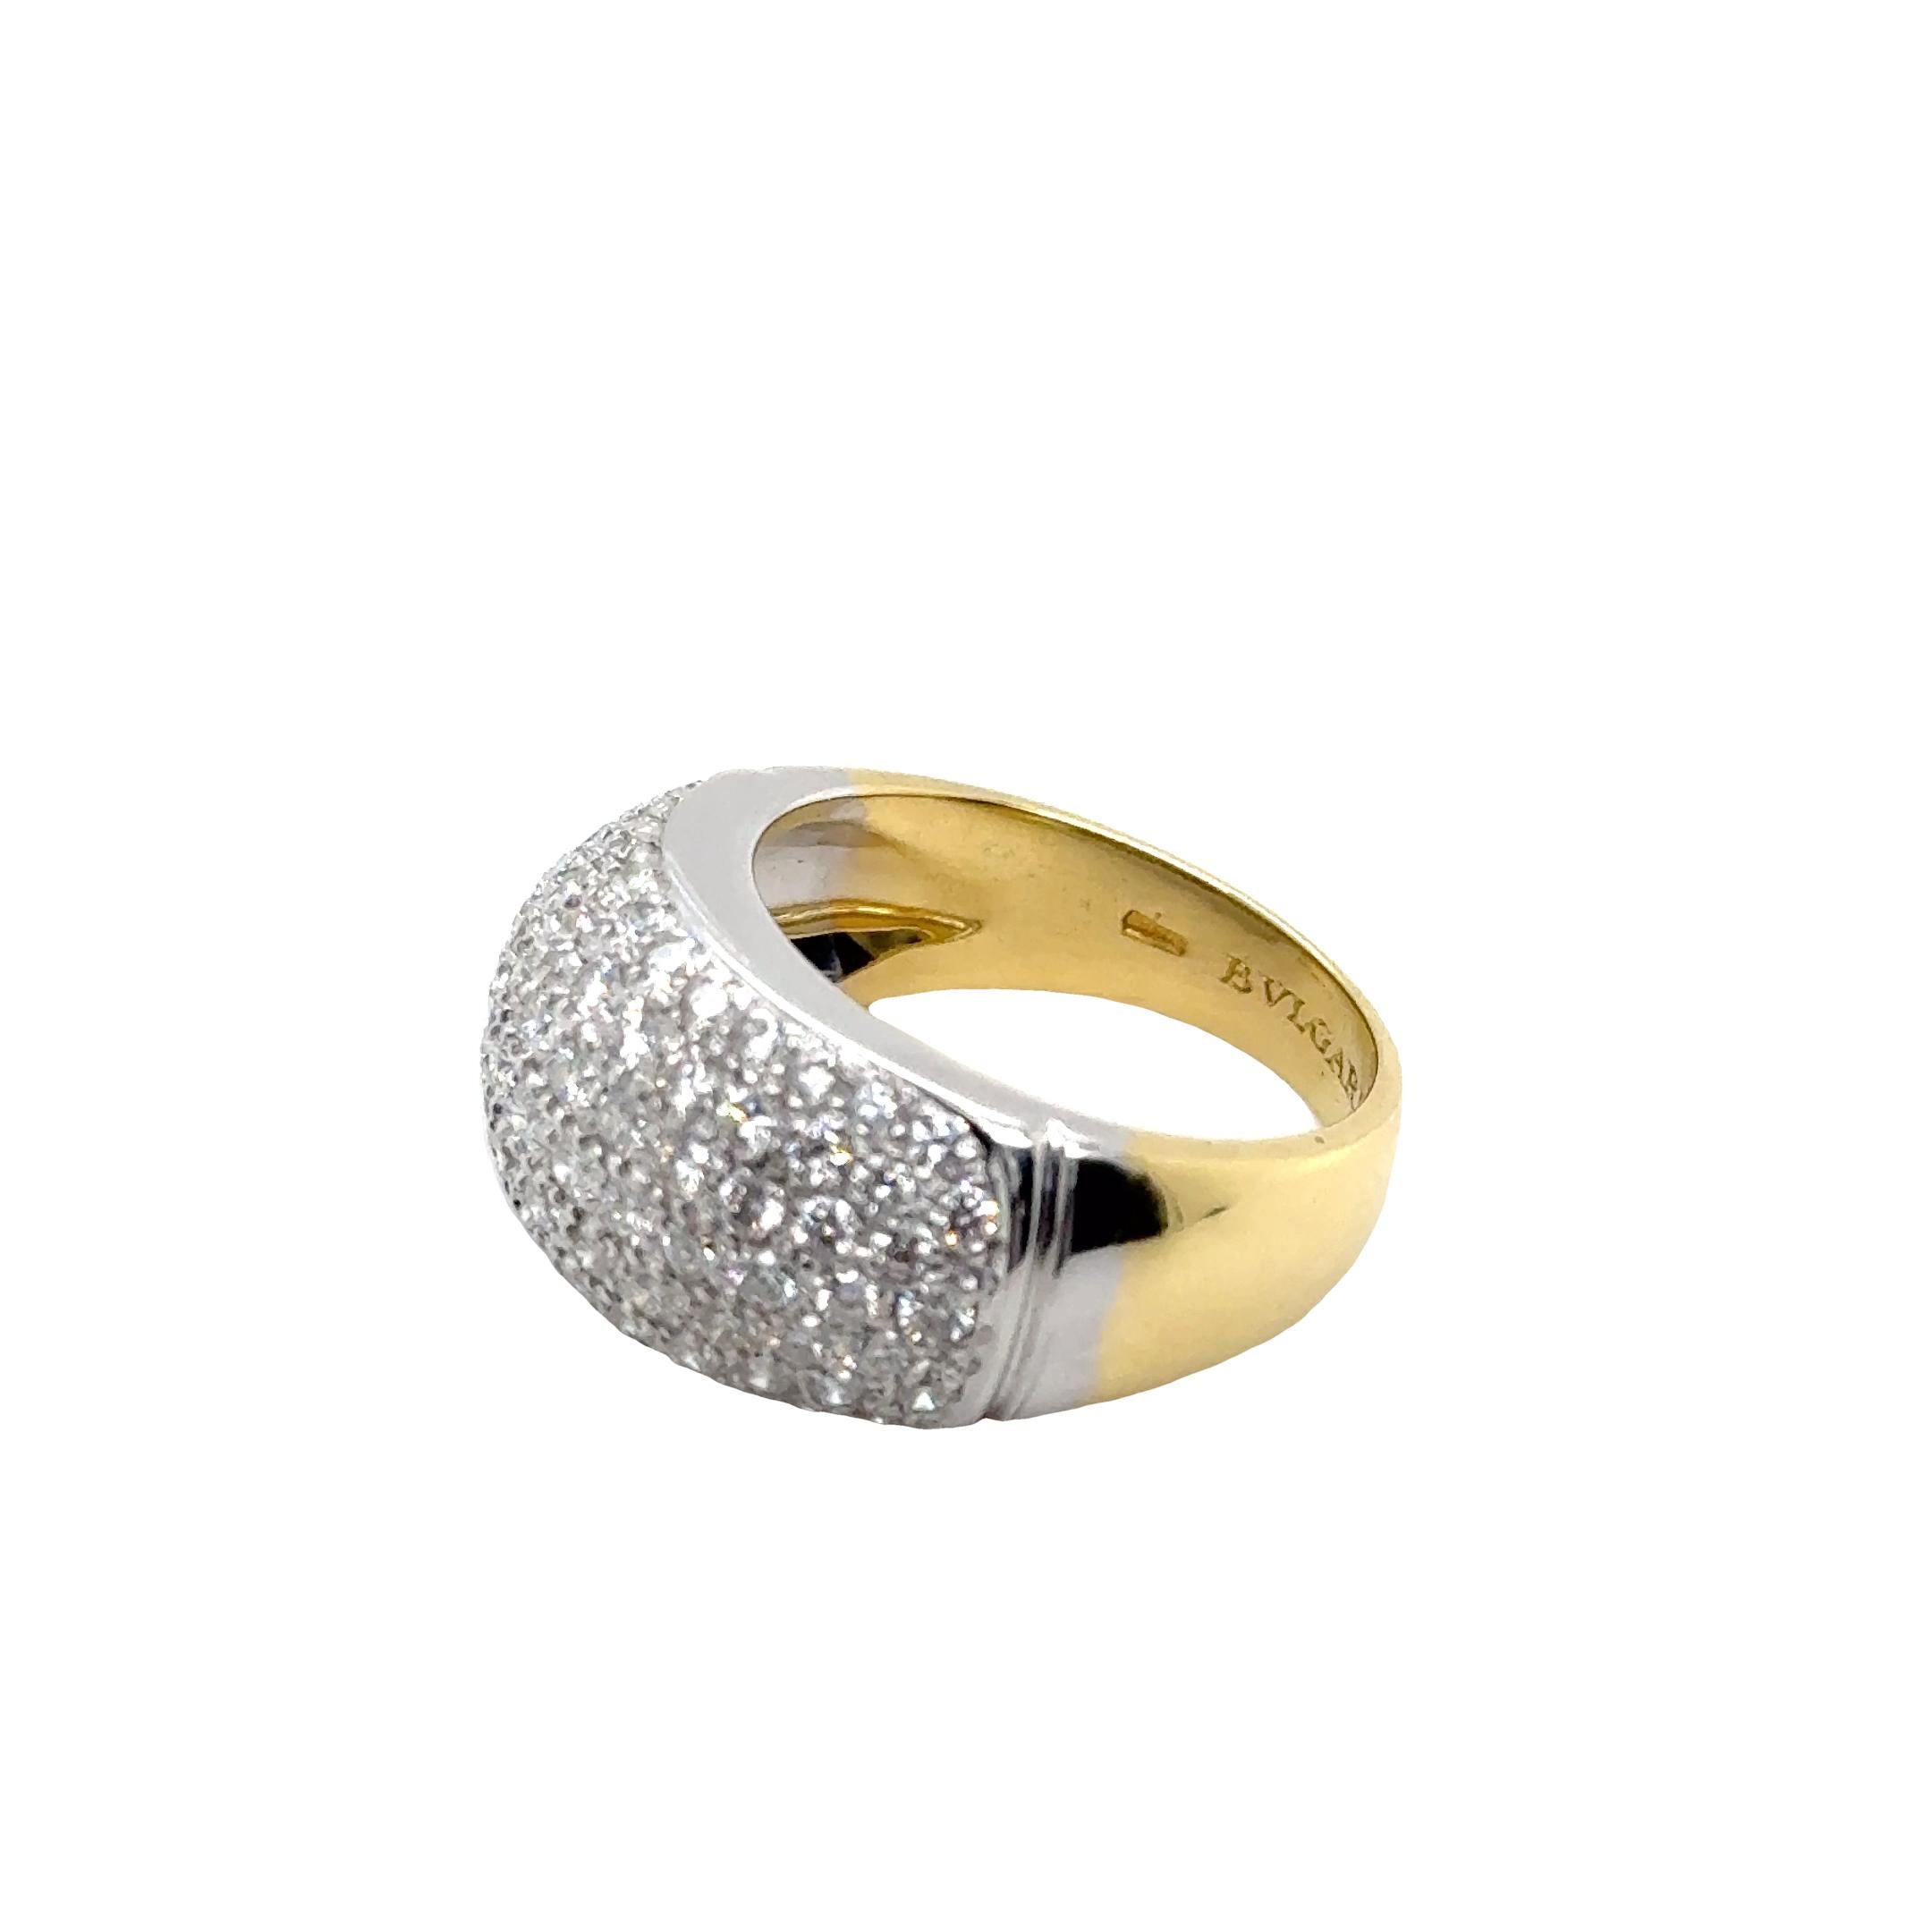 Bulgari diamond Bombe ring set with 1.60ct In Good Condition For Sale In Addlestone, GB